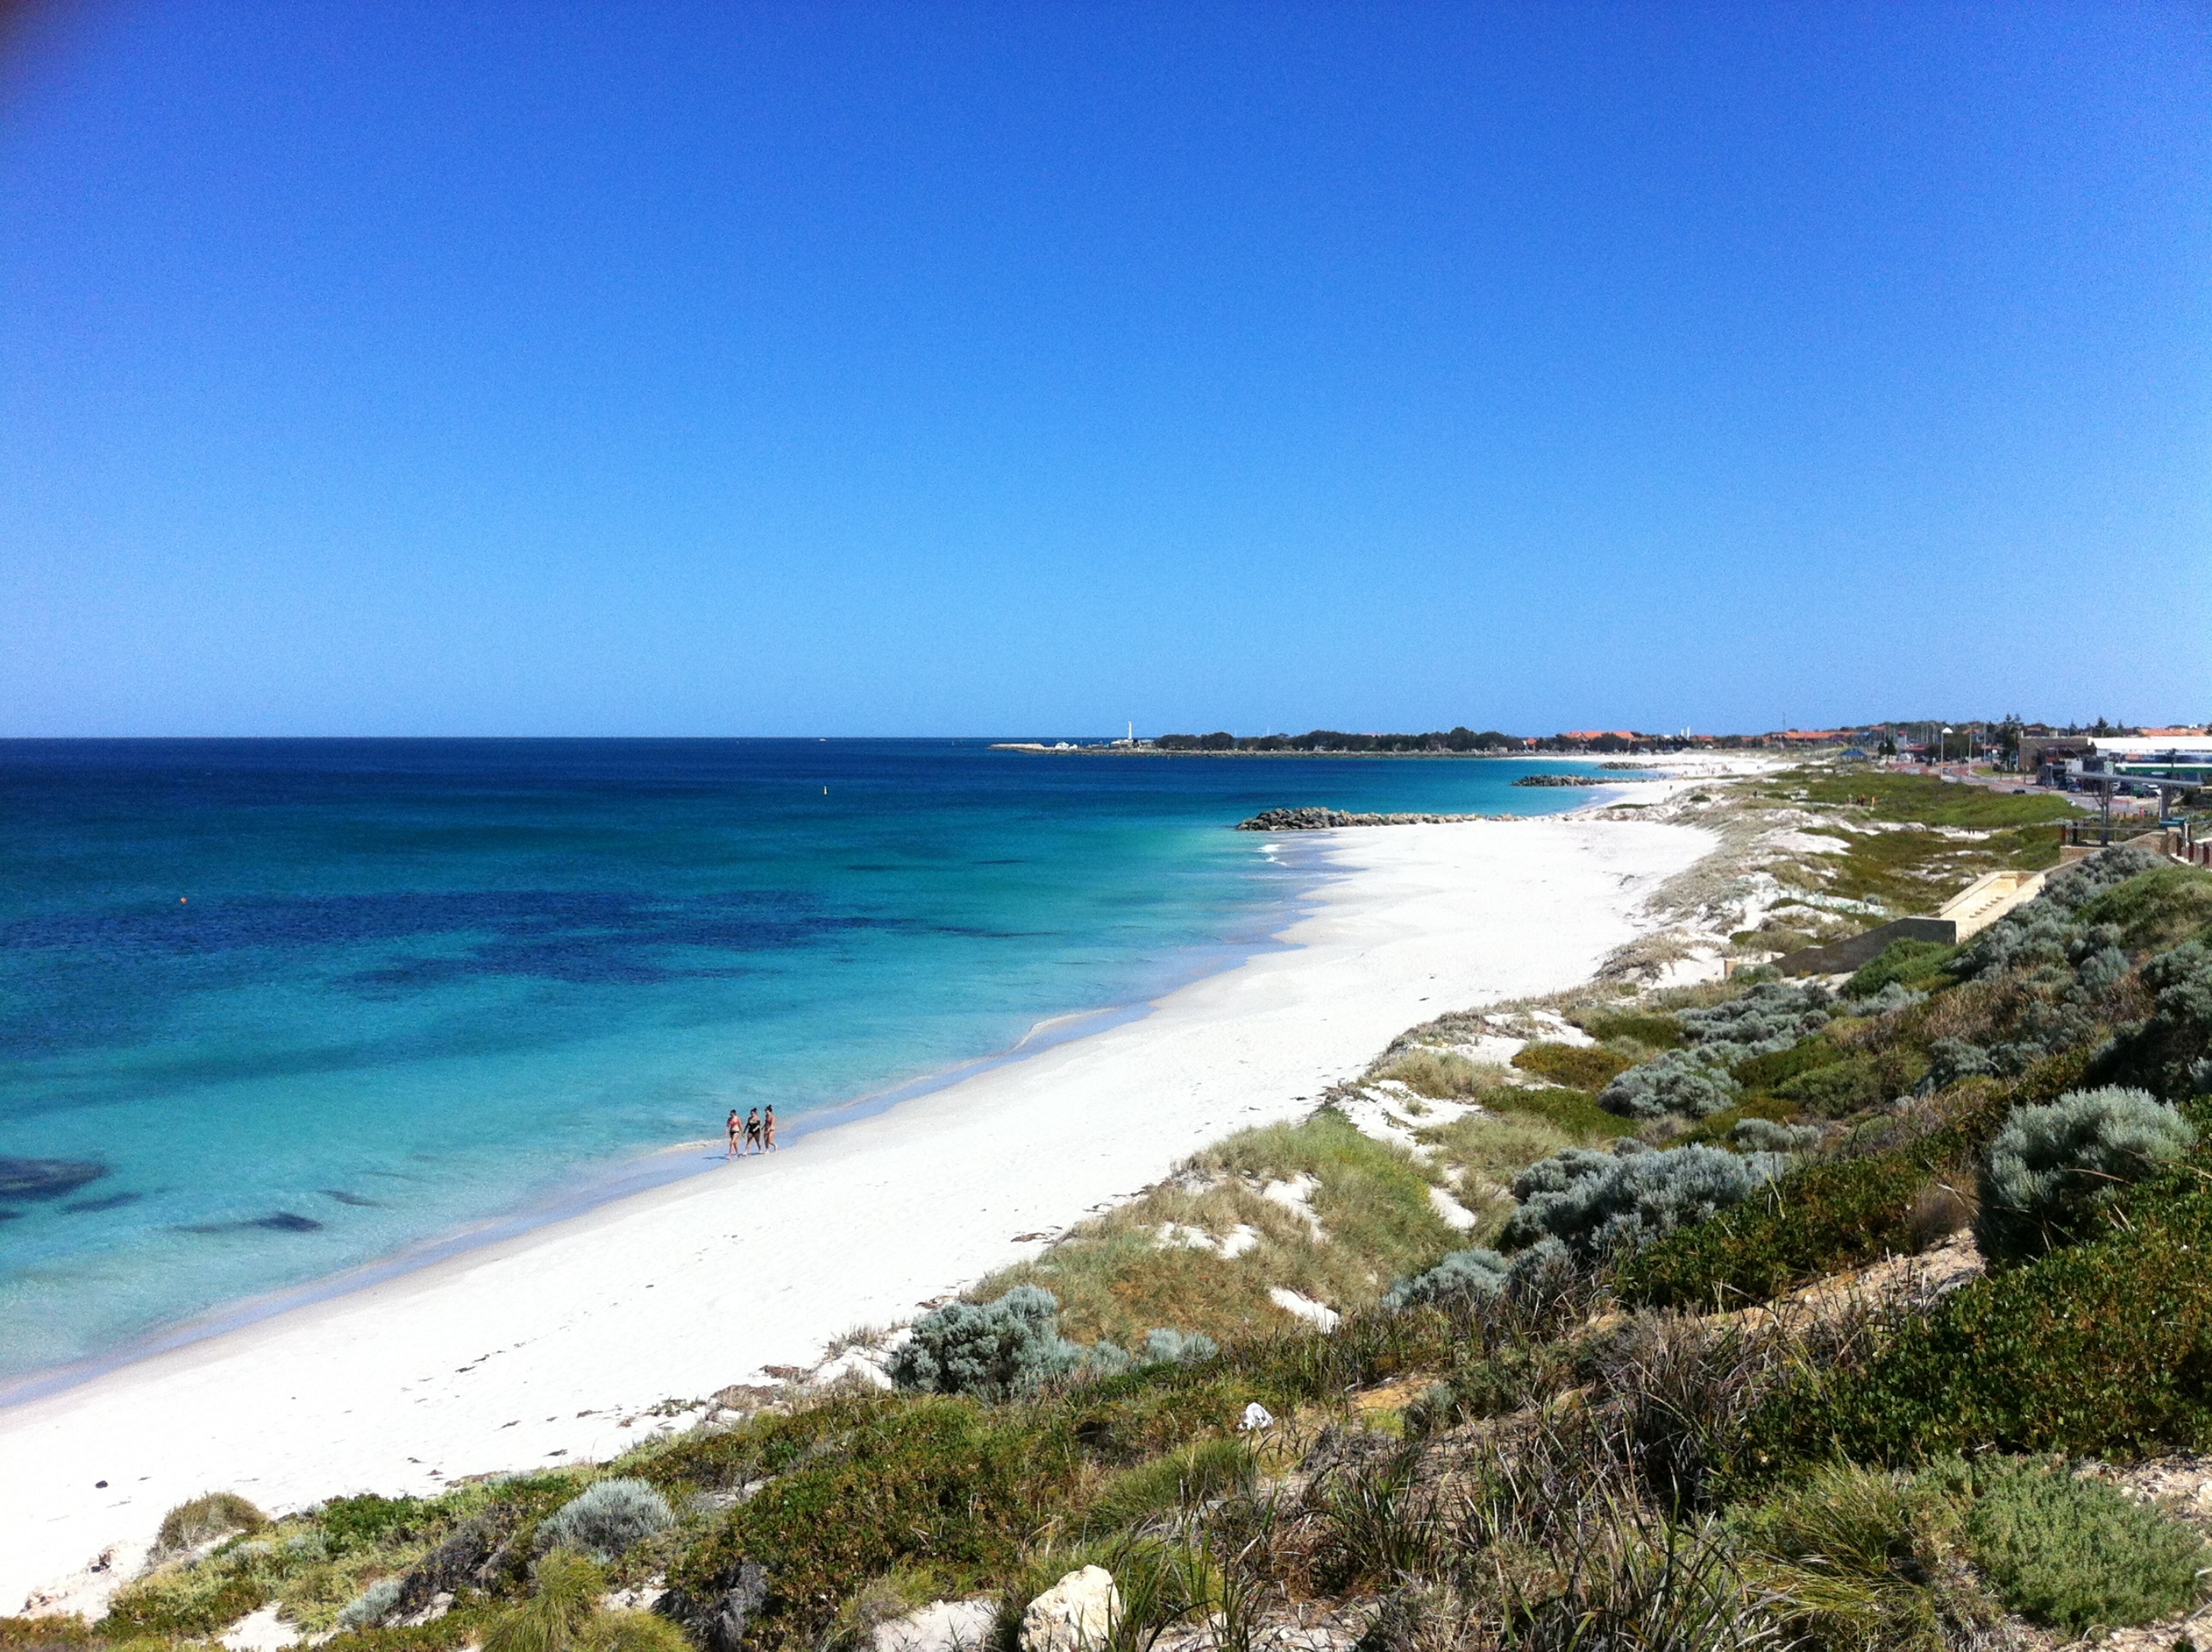 Make the most of your stay at Quality Resort Sorrento Beach